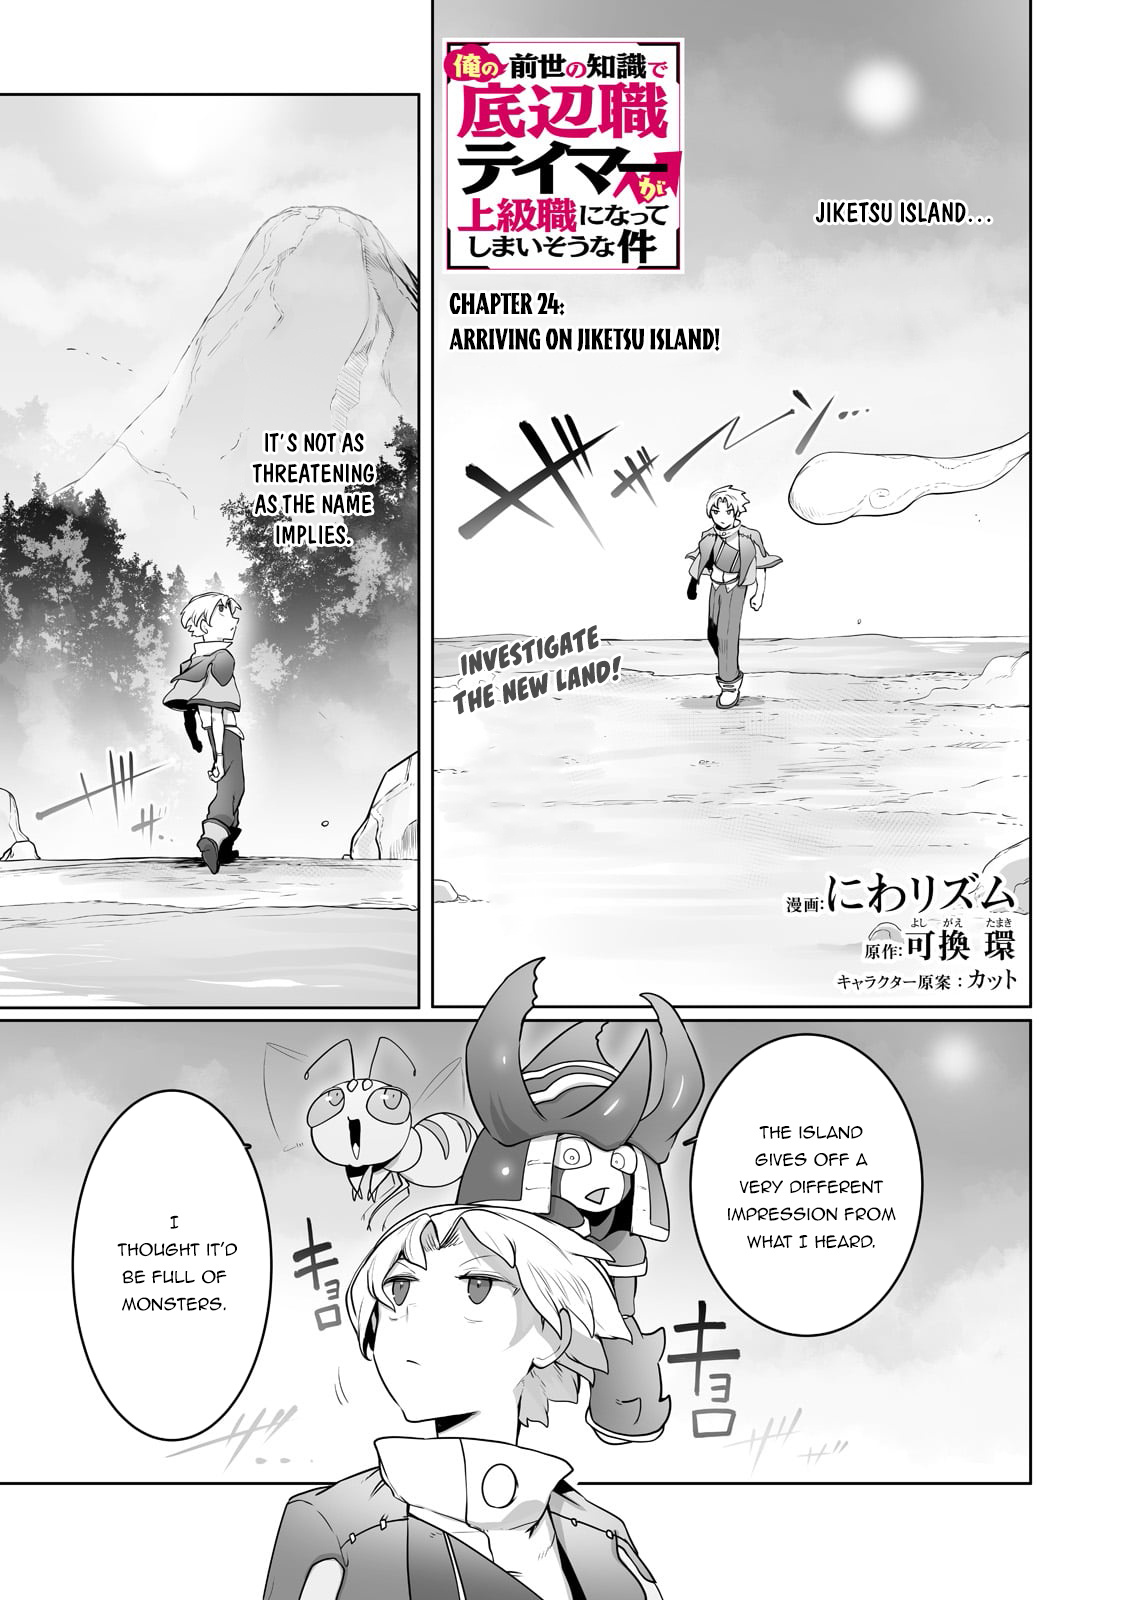 The Useless Tamer Will Turn Into The Top Unconsciously By My Previous Life Knowledge - Page 2